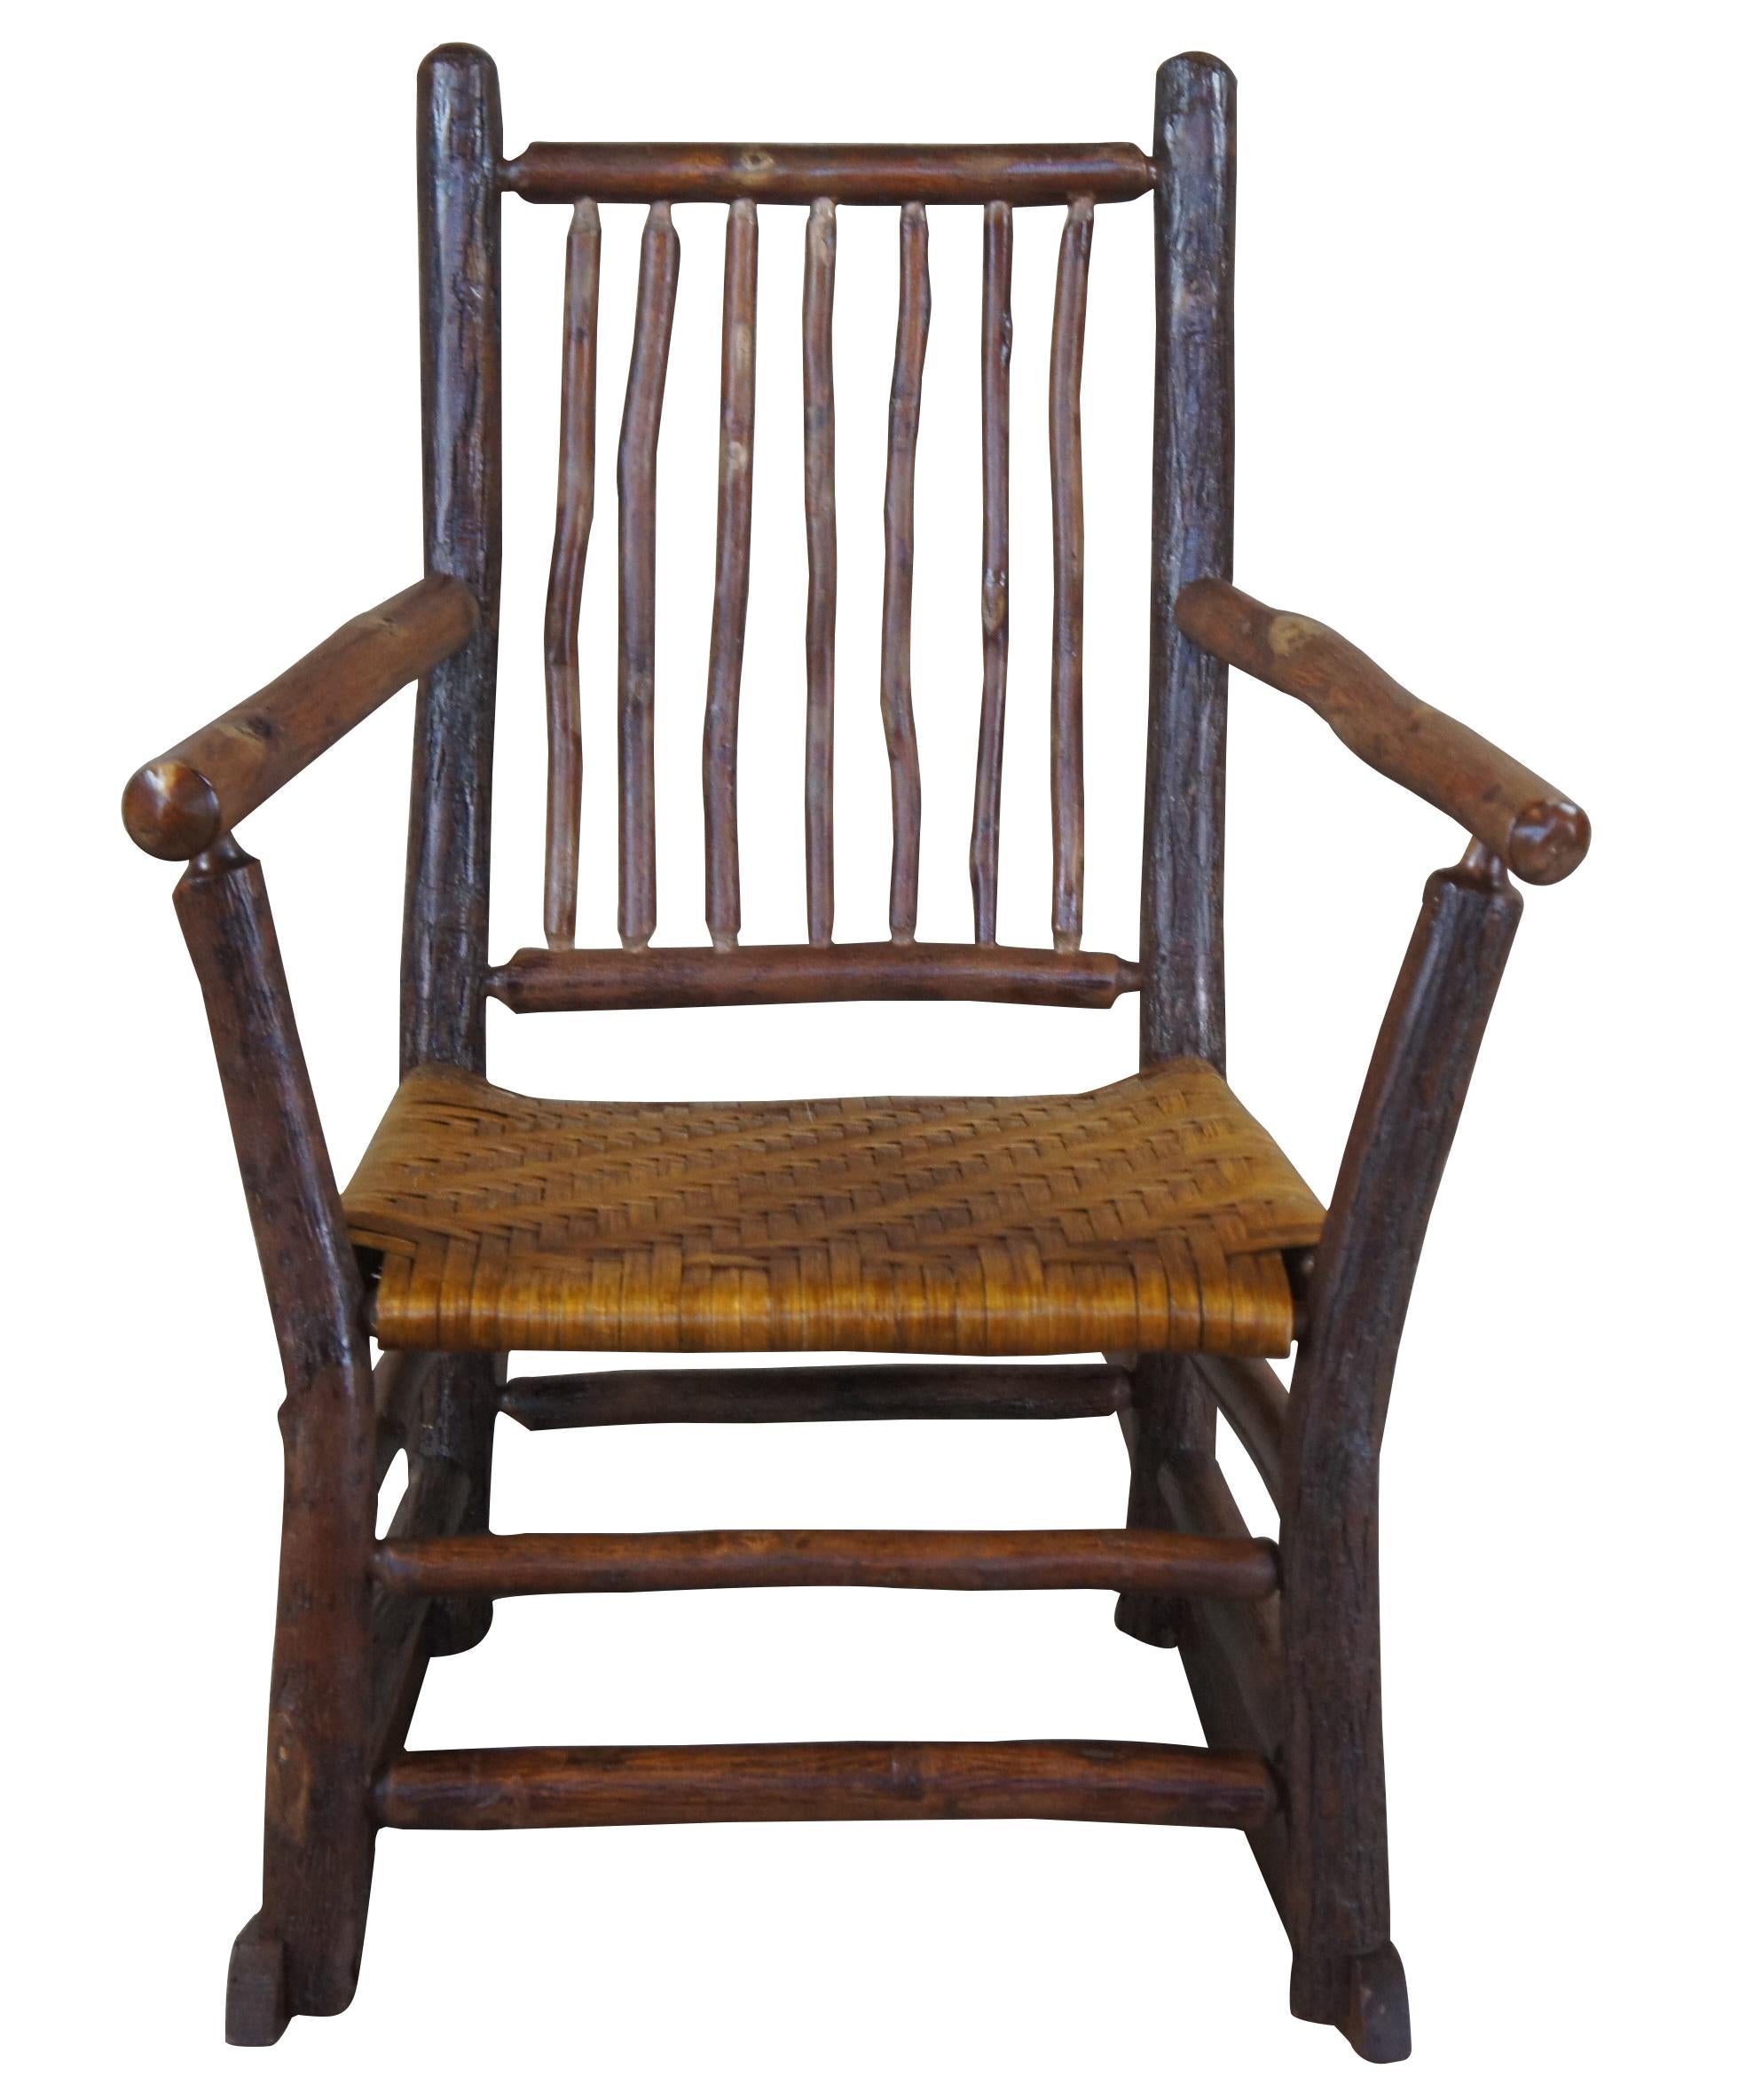 Antique circa 1930s #25 rocking chair by Old Hickory Furniture Company of Martinsville, Indiana. Features a primitive Adirondack style with flared arms and rattan seat. 

History
In the 1800's as pioneers traveled West across America, they